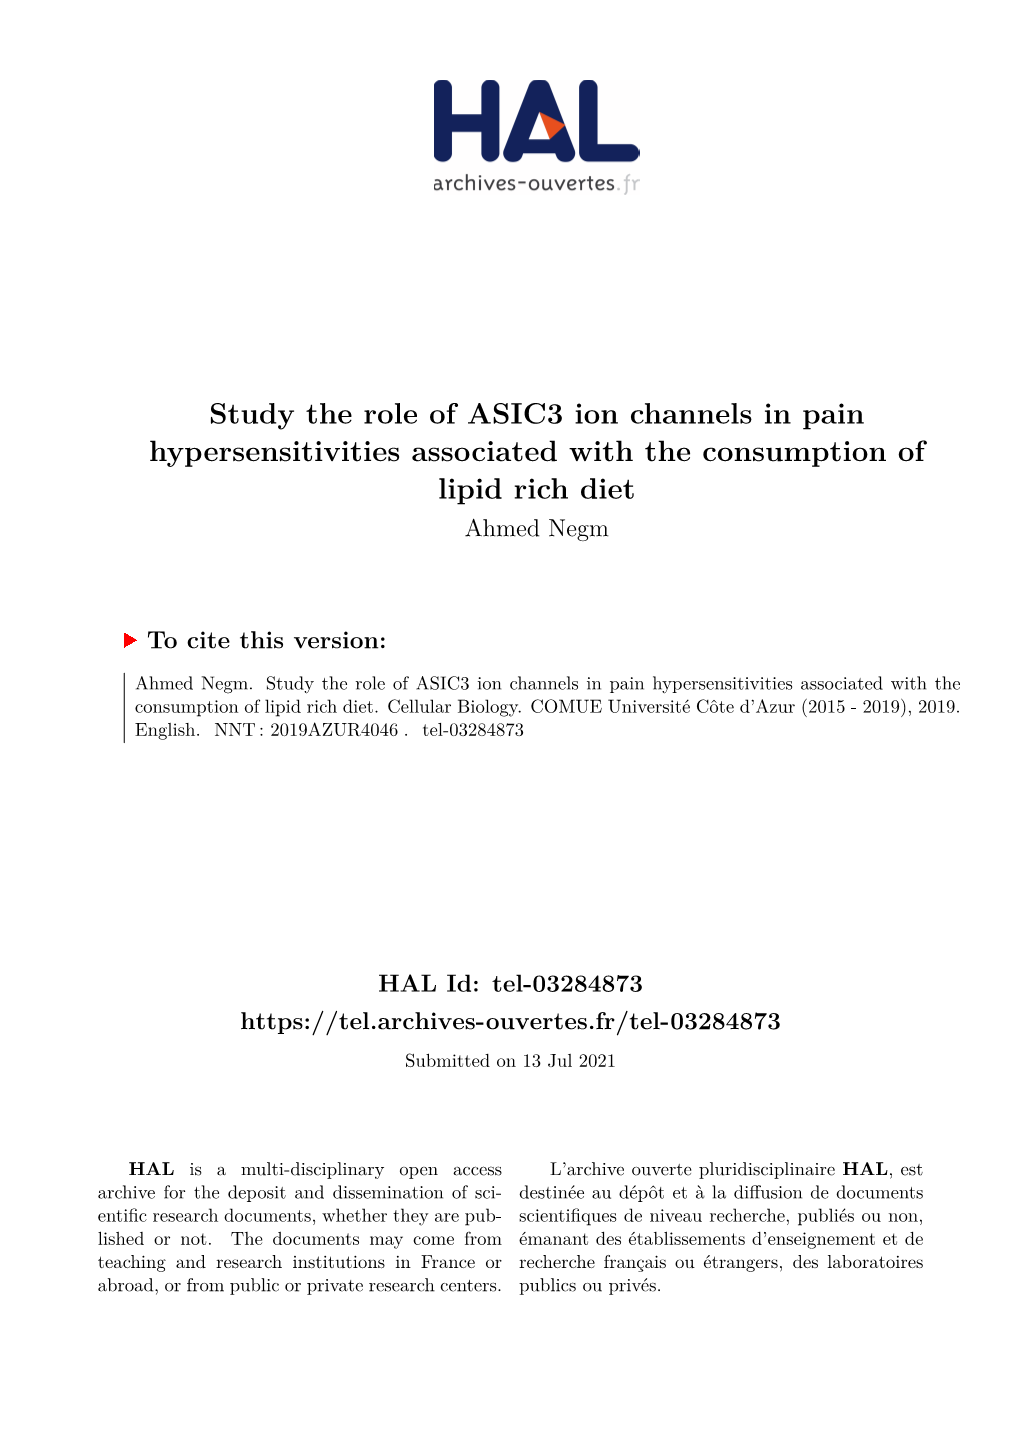 Study the Role of ASIC3 Ion Channels in Pain Hypersensitivities Associated with the Consumption of Lipid Rich Diet Ahmed Negm